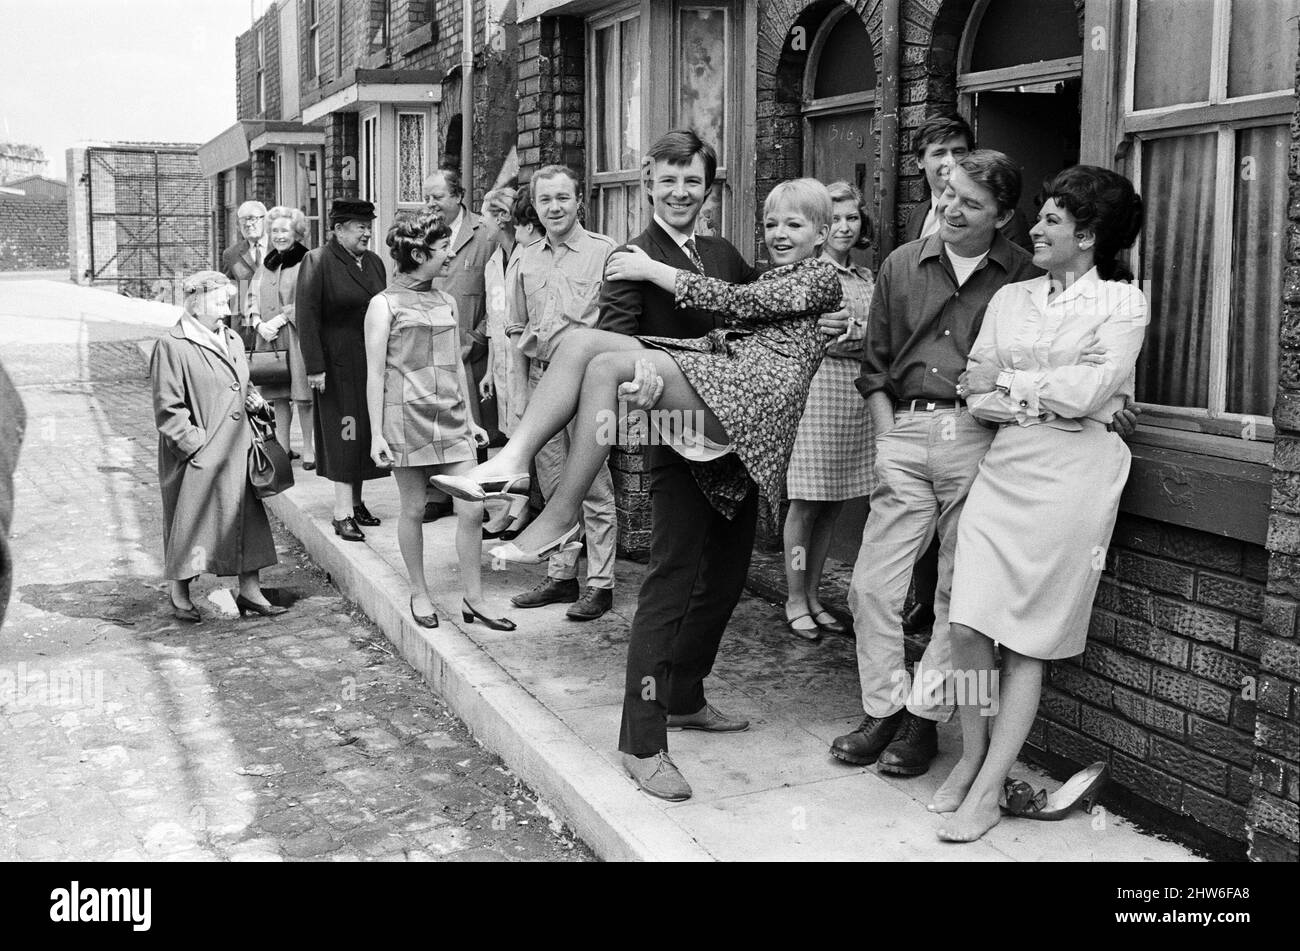 A new street setting for 'Coronation Street'. Granada TV have built an outdoor set for shooting some of the scenes. Pictured are cast members:  Cast member Dennis Tanner (Philip Lowrie) with his bride Jenny Sutton (Mitzi Rogers) after their wedding with Annie Walker (Doris Speed), Ena Sharples (Violet Carson), Emily Nugent (Eileen Derbyshire), Valerie Barlow (Anne Reid), Ken Barlow (William Roache) Len Fairclough (Peter Adamson) and Elsie Tanner (Pat Phoenix). 18th May 1968. Stock Photo